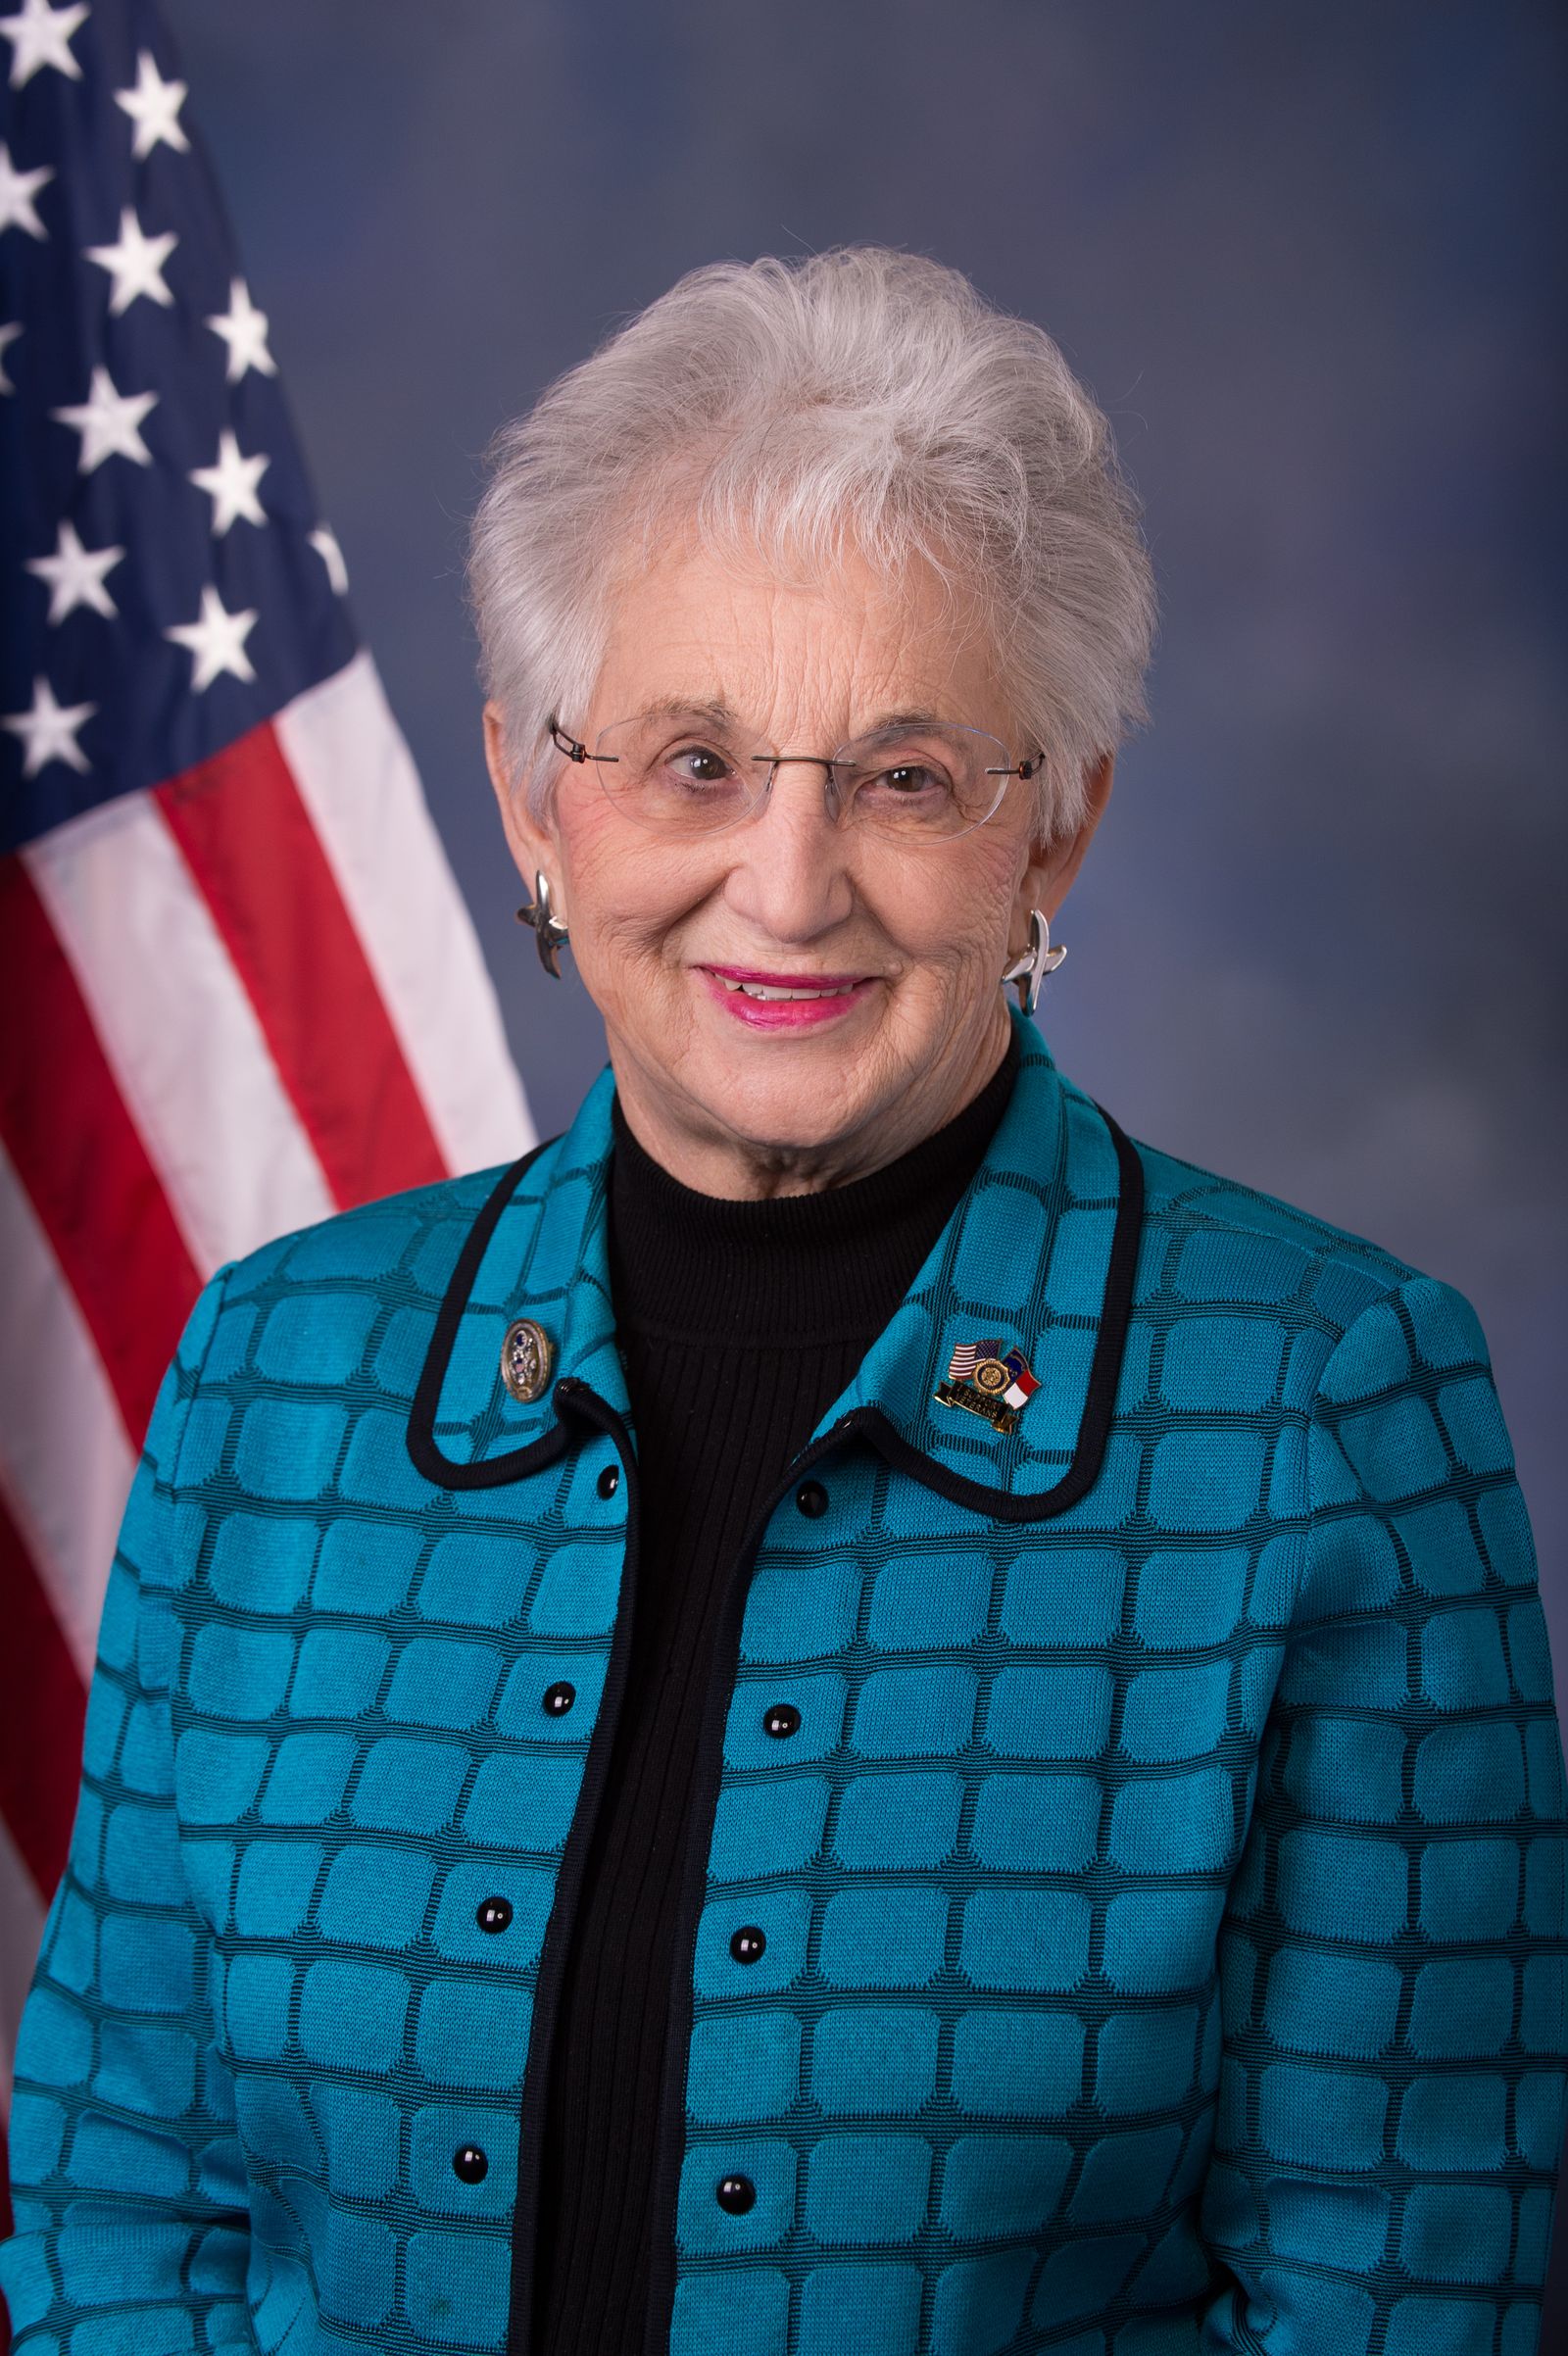 This is a headshot of Rep. Virginia Foxx, R-N.C., chairwoman of the House Committee on Education and Labor.